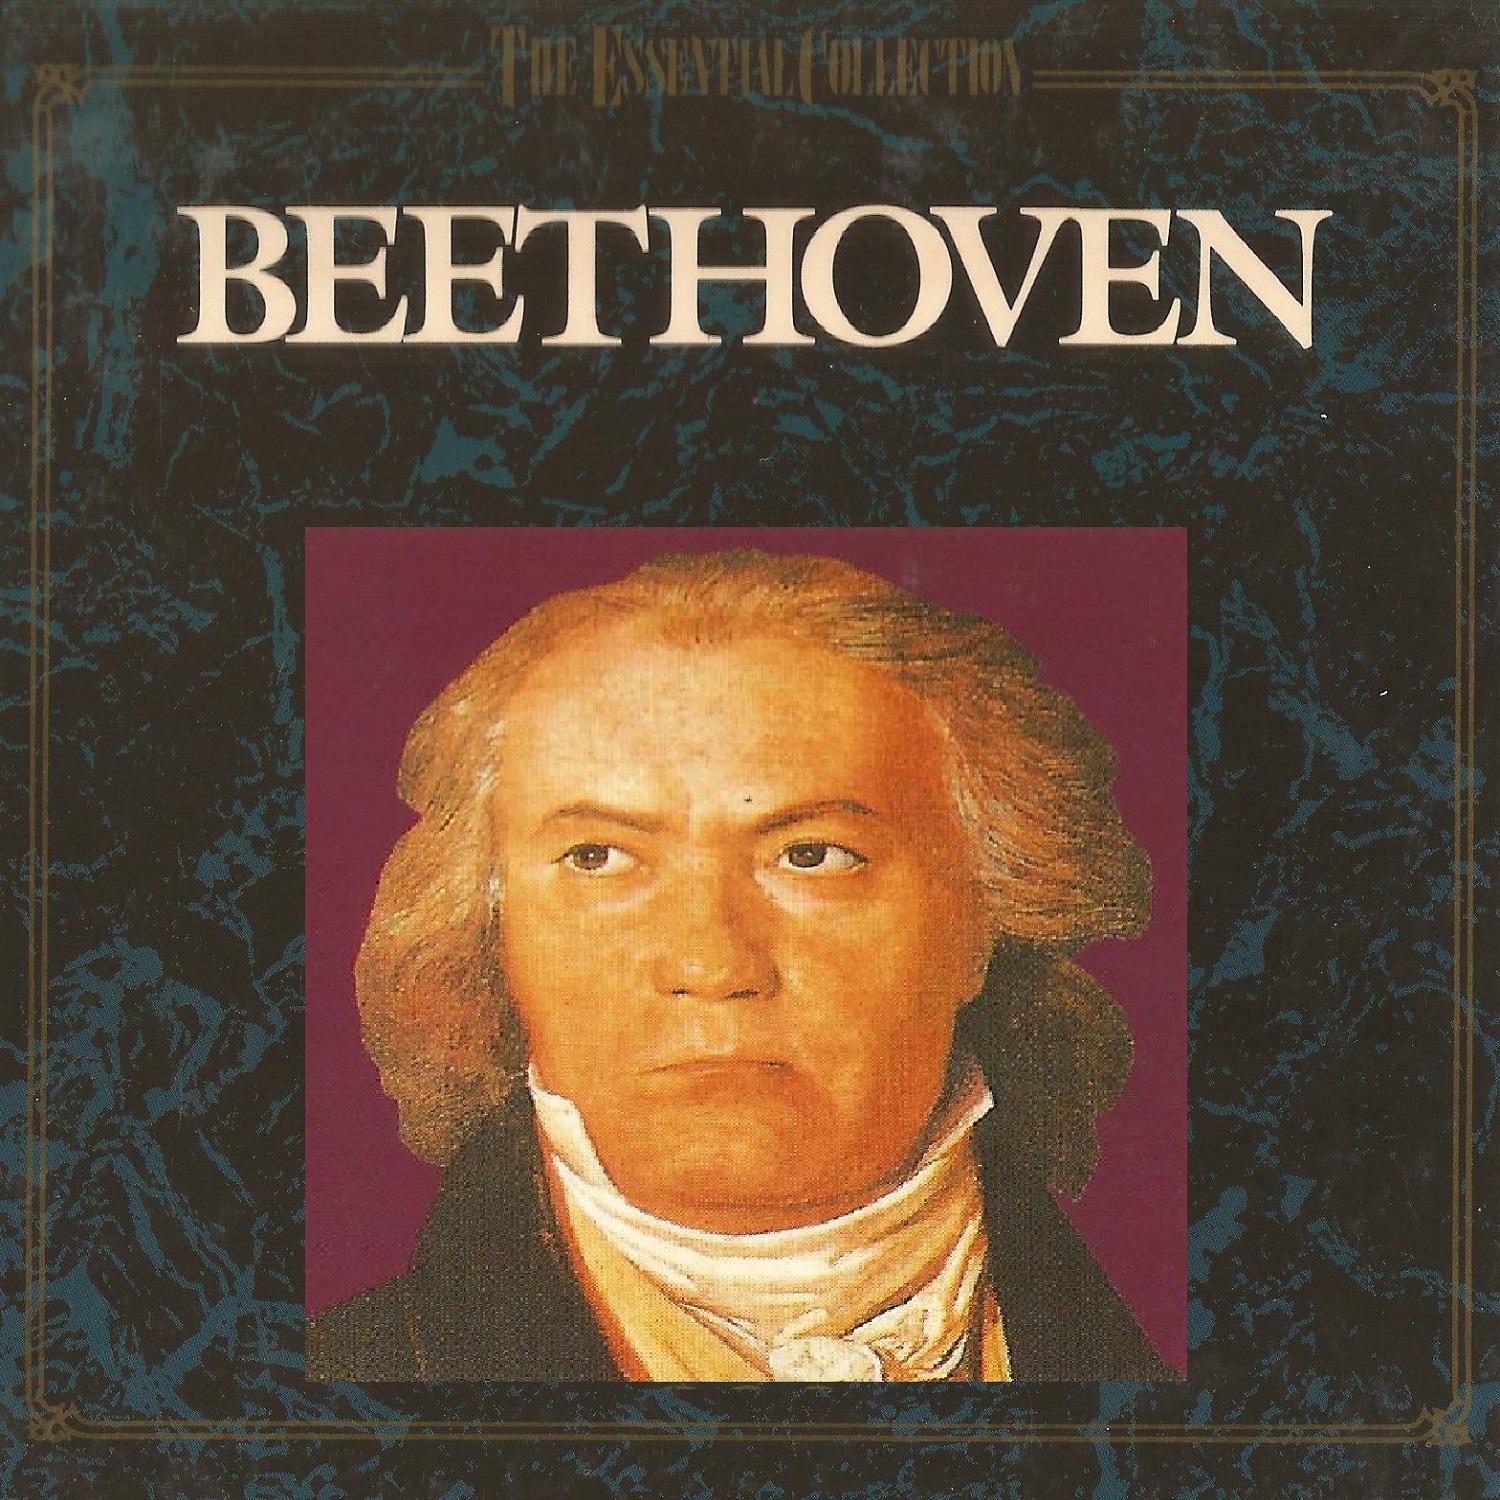 Beethoven, The Essential Collection专辑